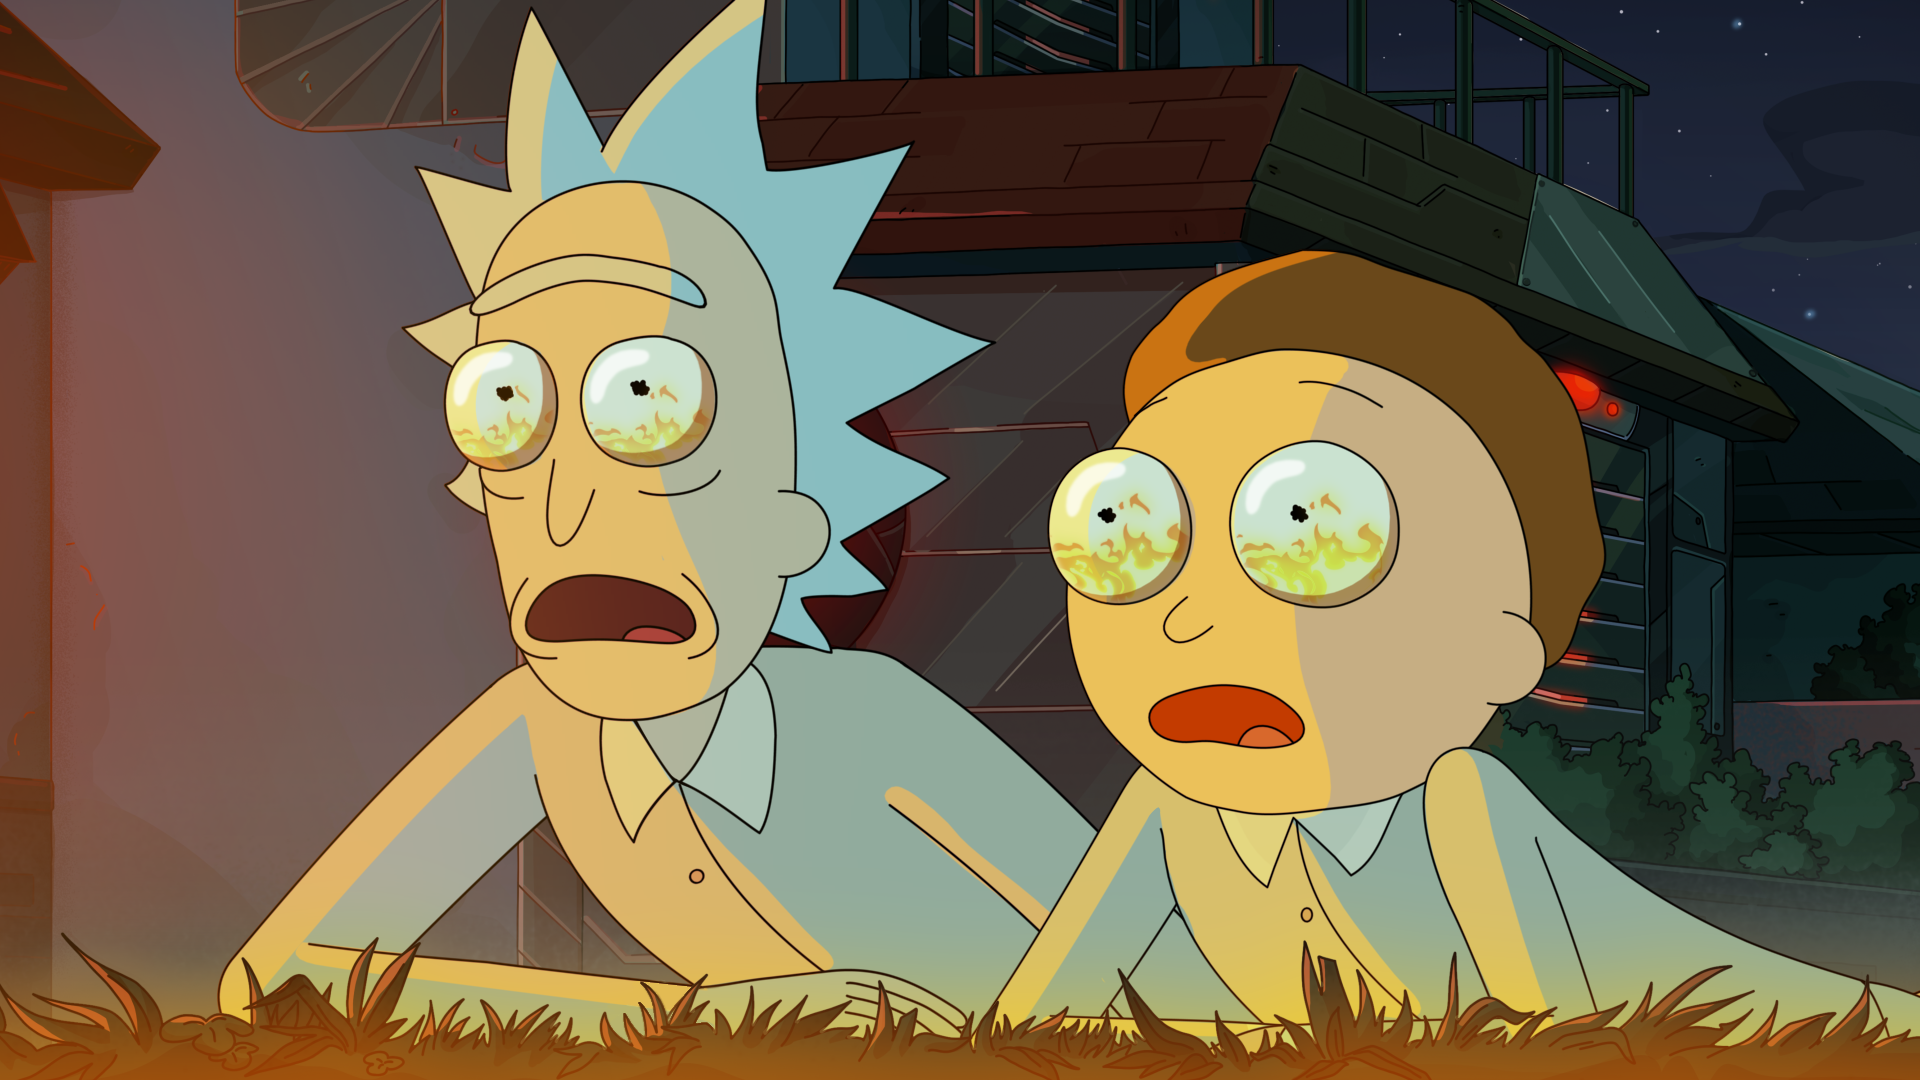 Rick and Morty Season 7 Episode 8 Release Date & Time on Adult Swim